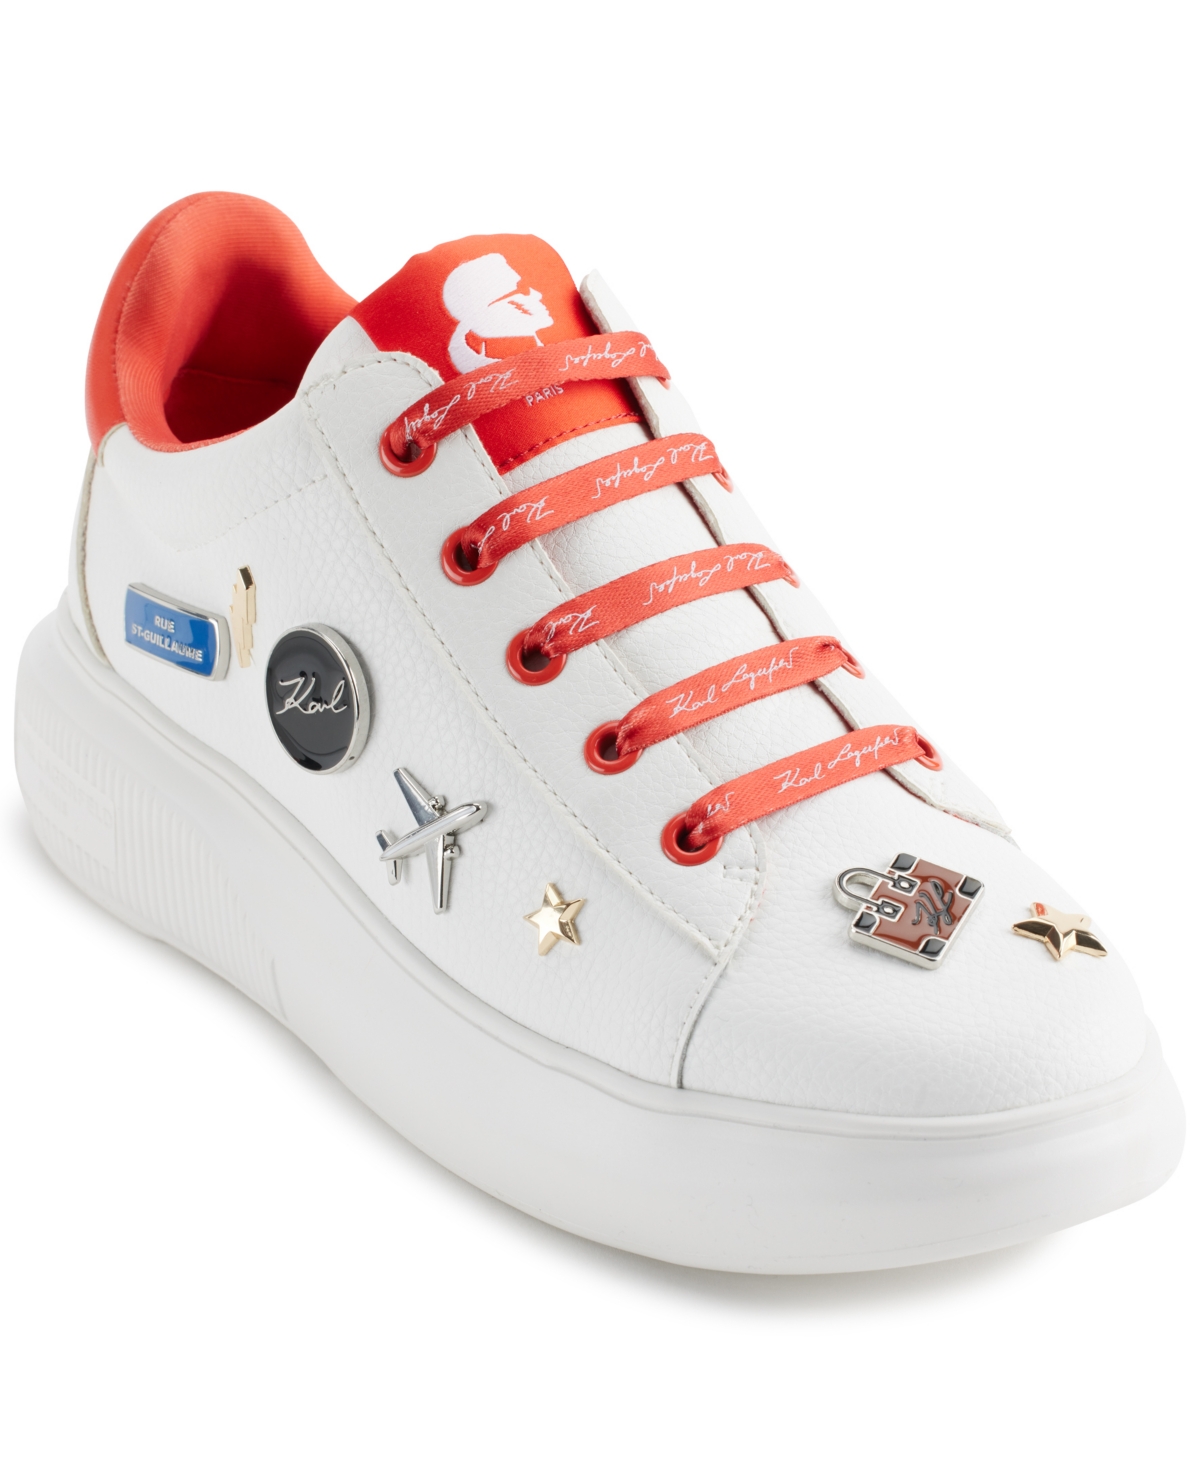 Justina Lace Up Platform Sneakers - Bright White/ Black